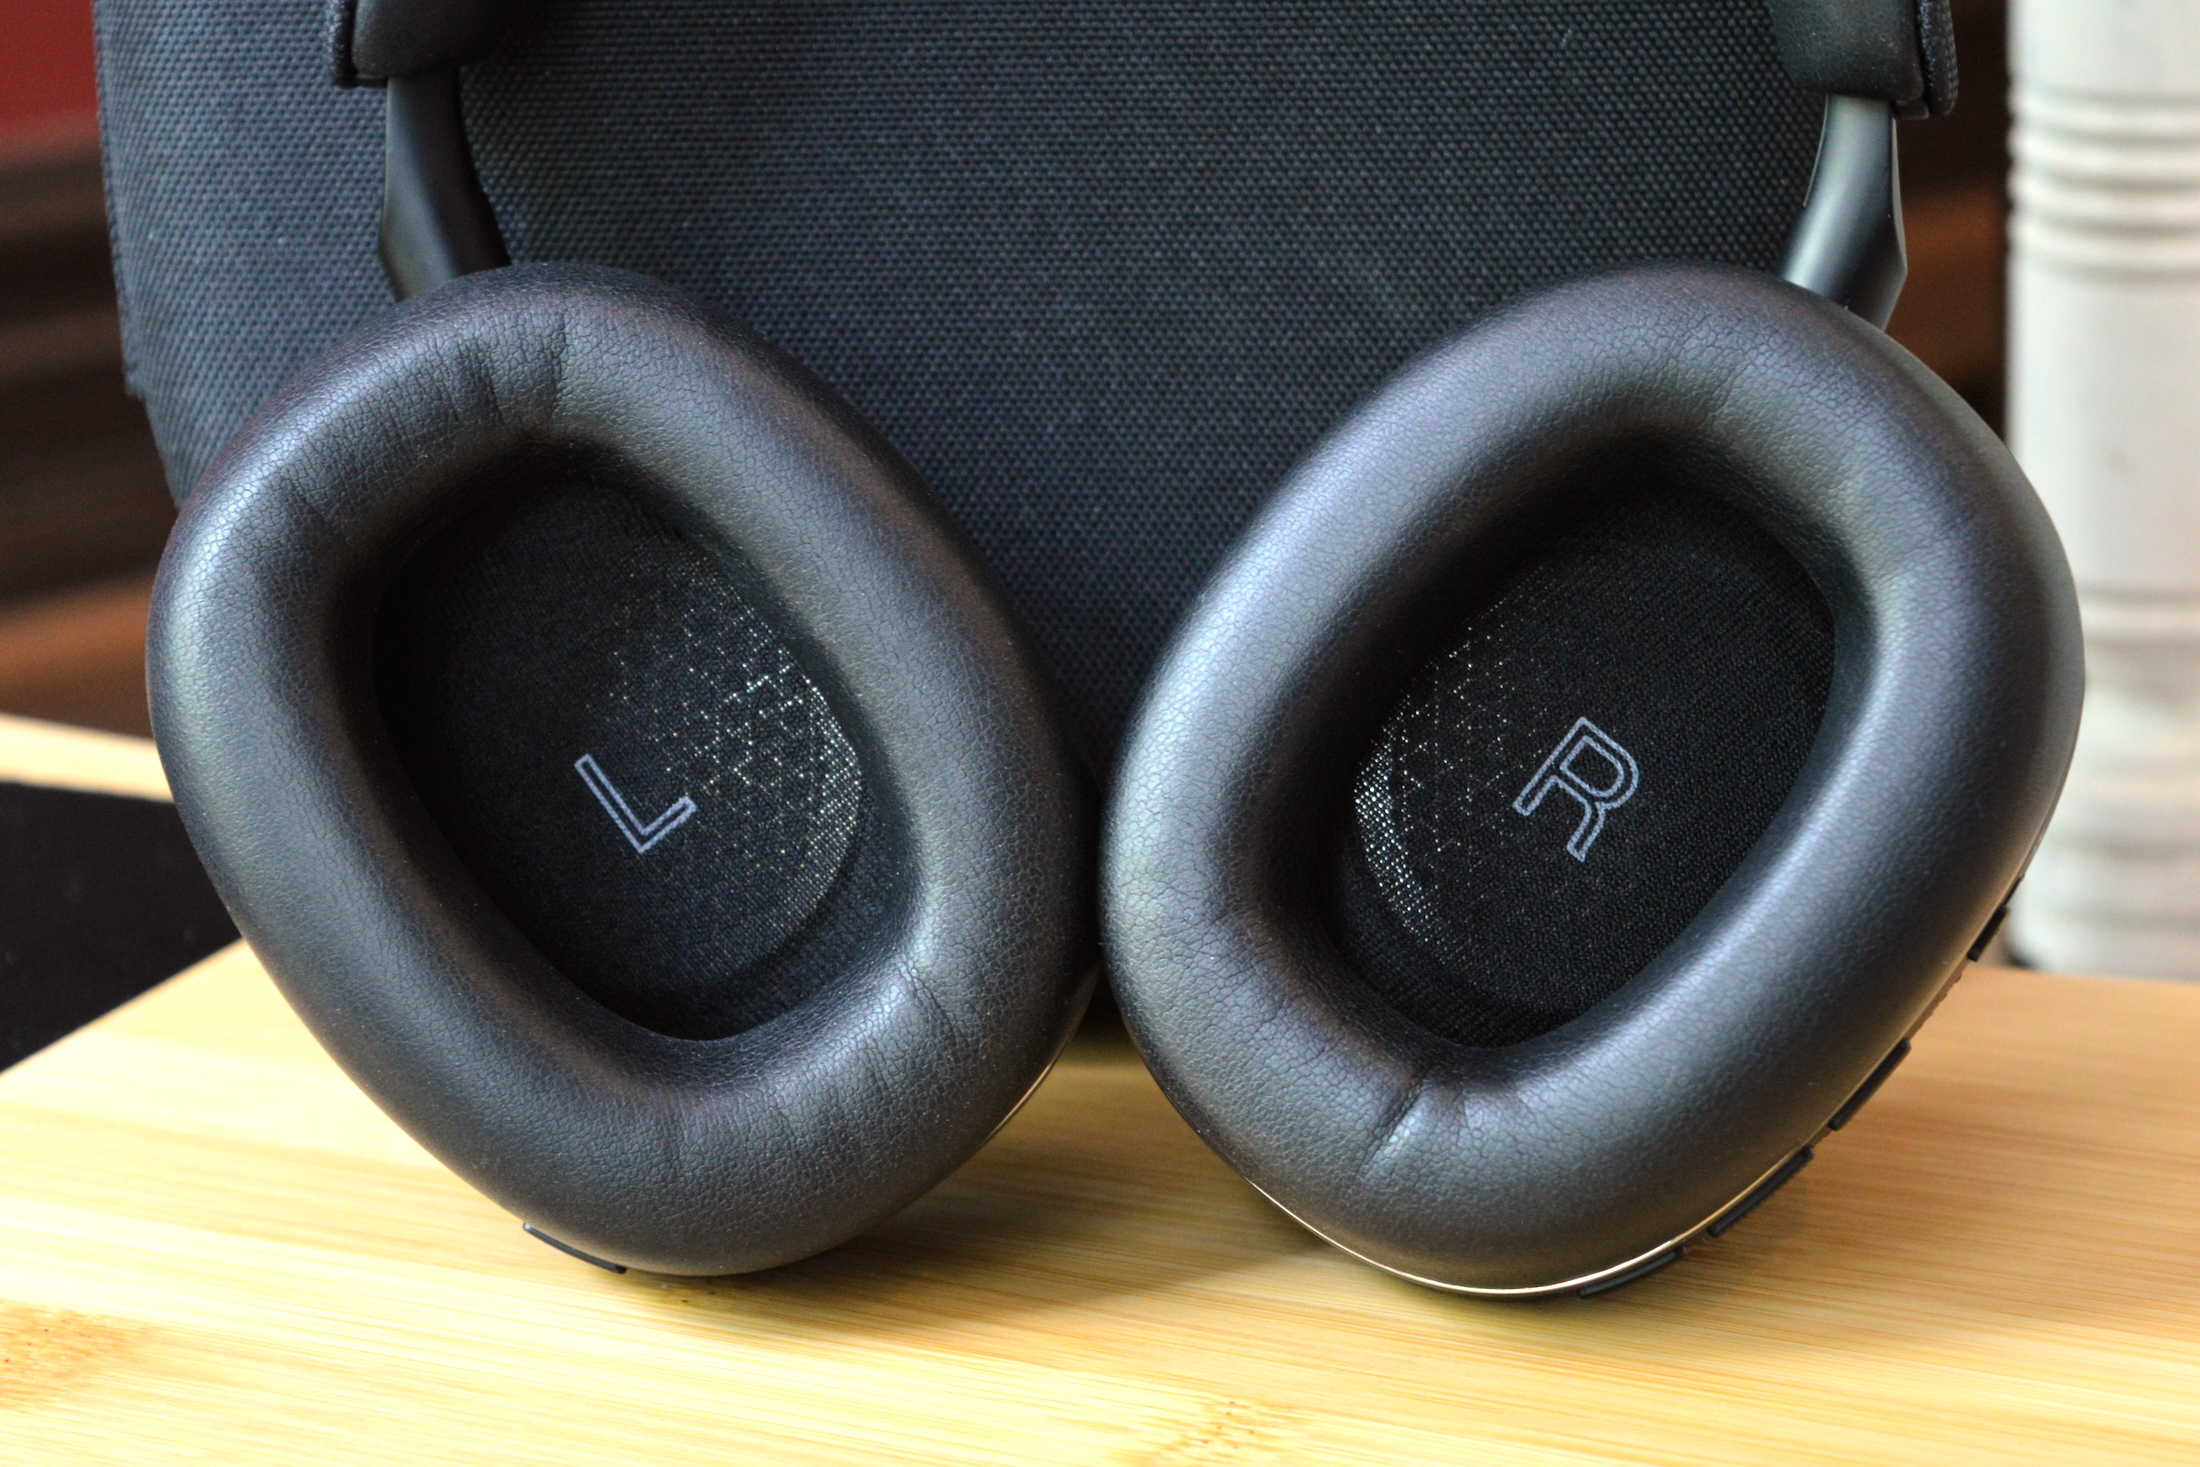 Bowers & Wilkins Px7 S2 interior of earcups.